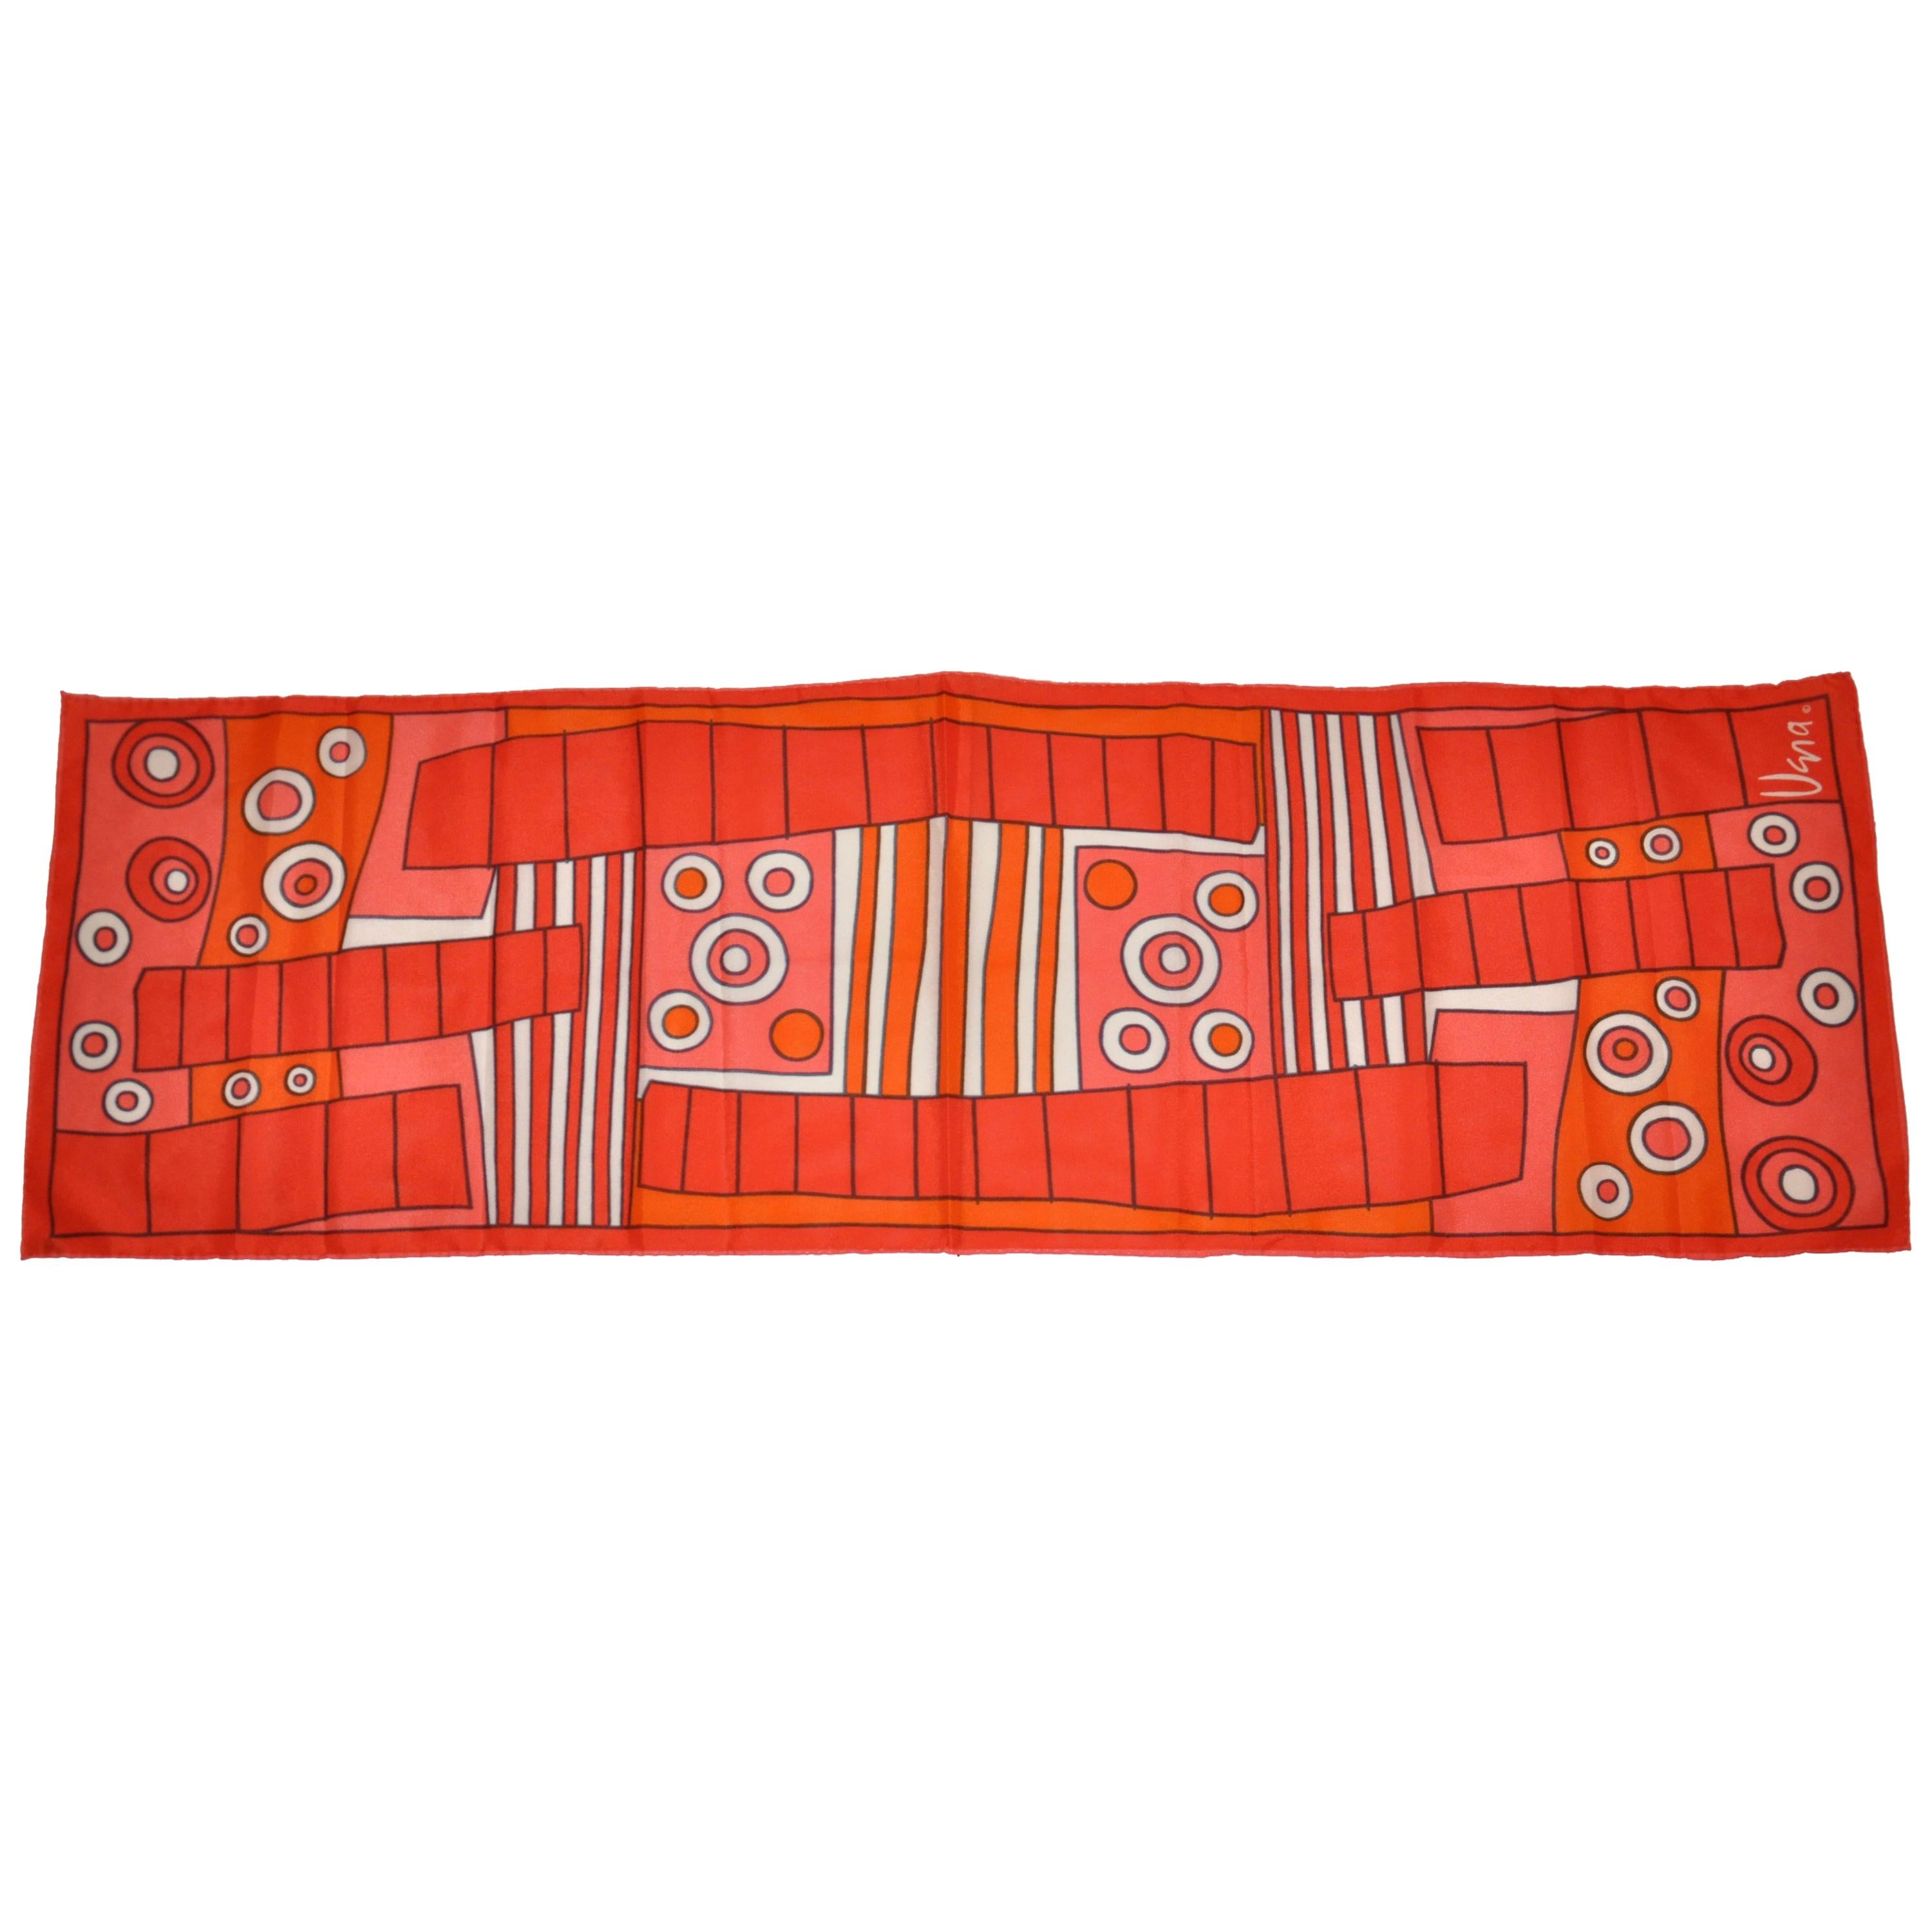 Vera Bold Neon Tangerine & Red Mod Abstract Print Scarf For Sale